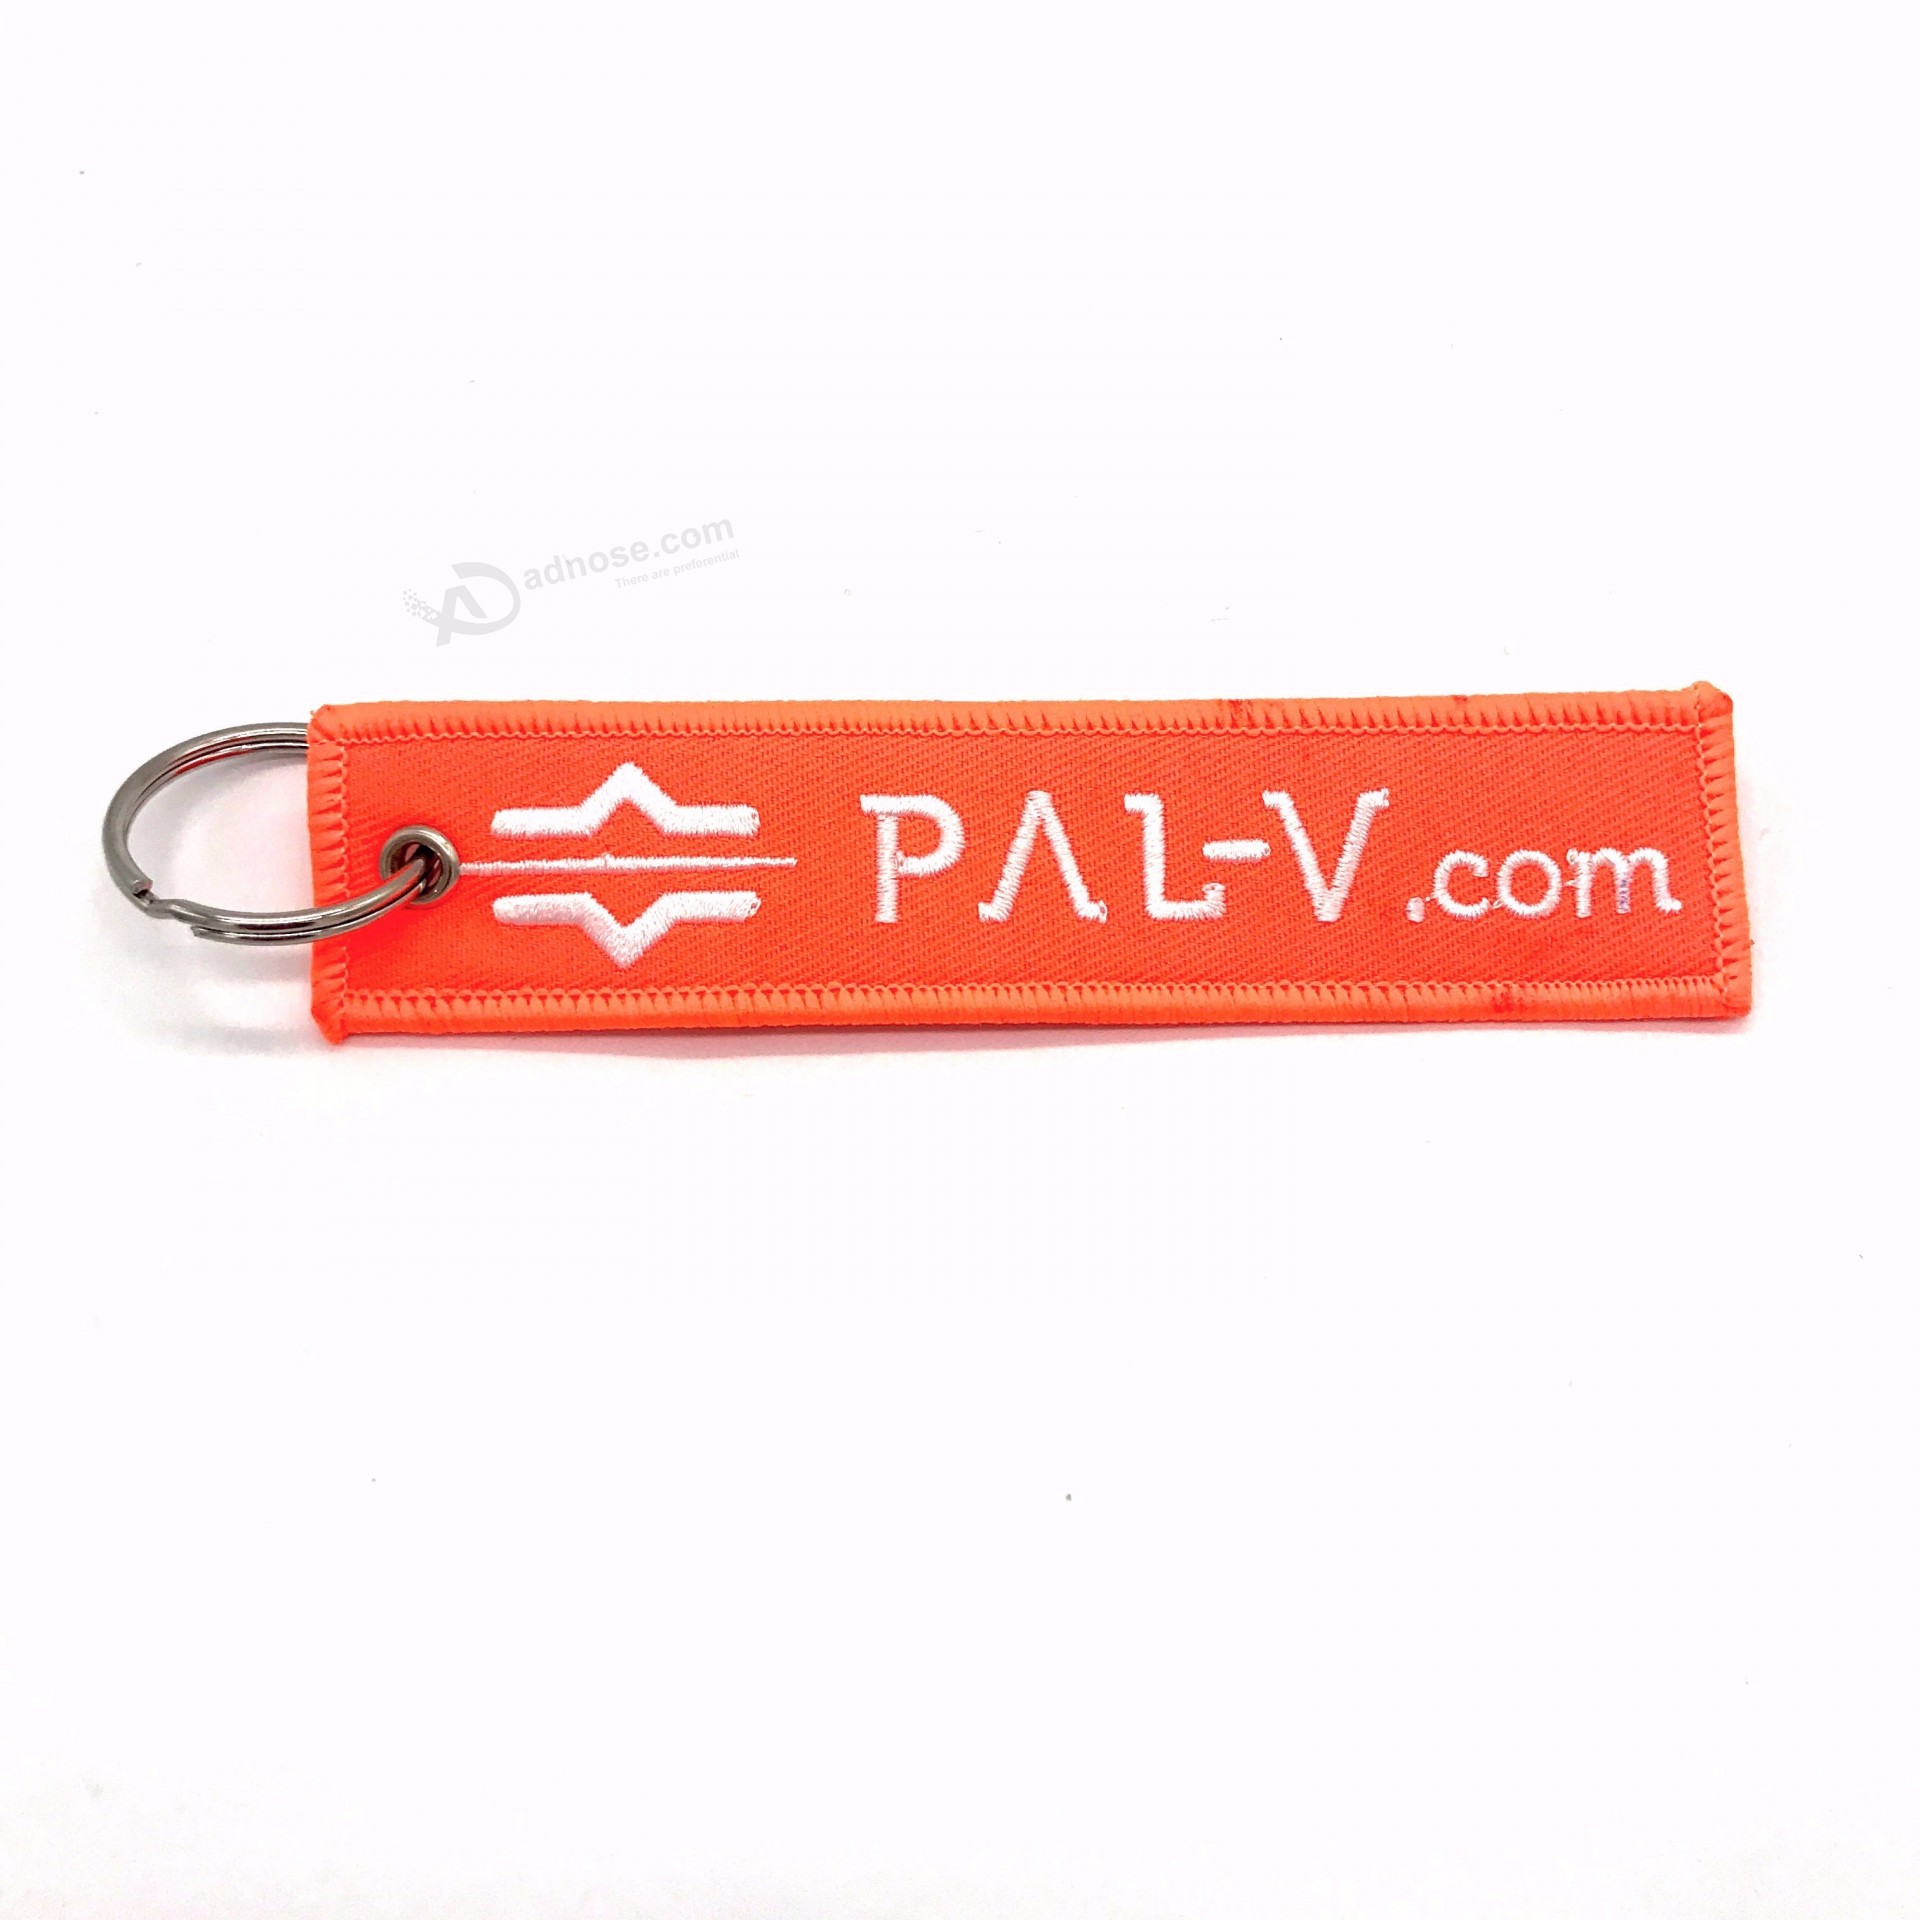 twill polyester fabric woven key chain jet tag for promotion marketing